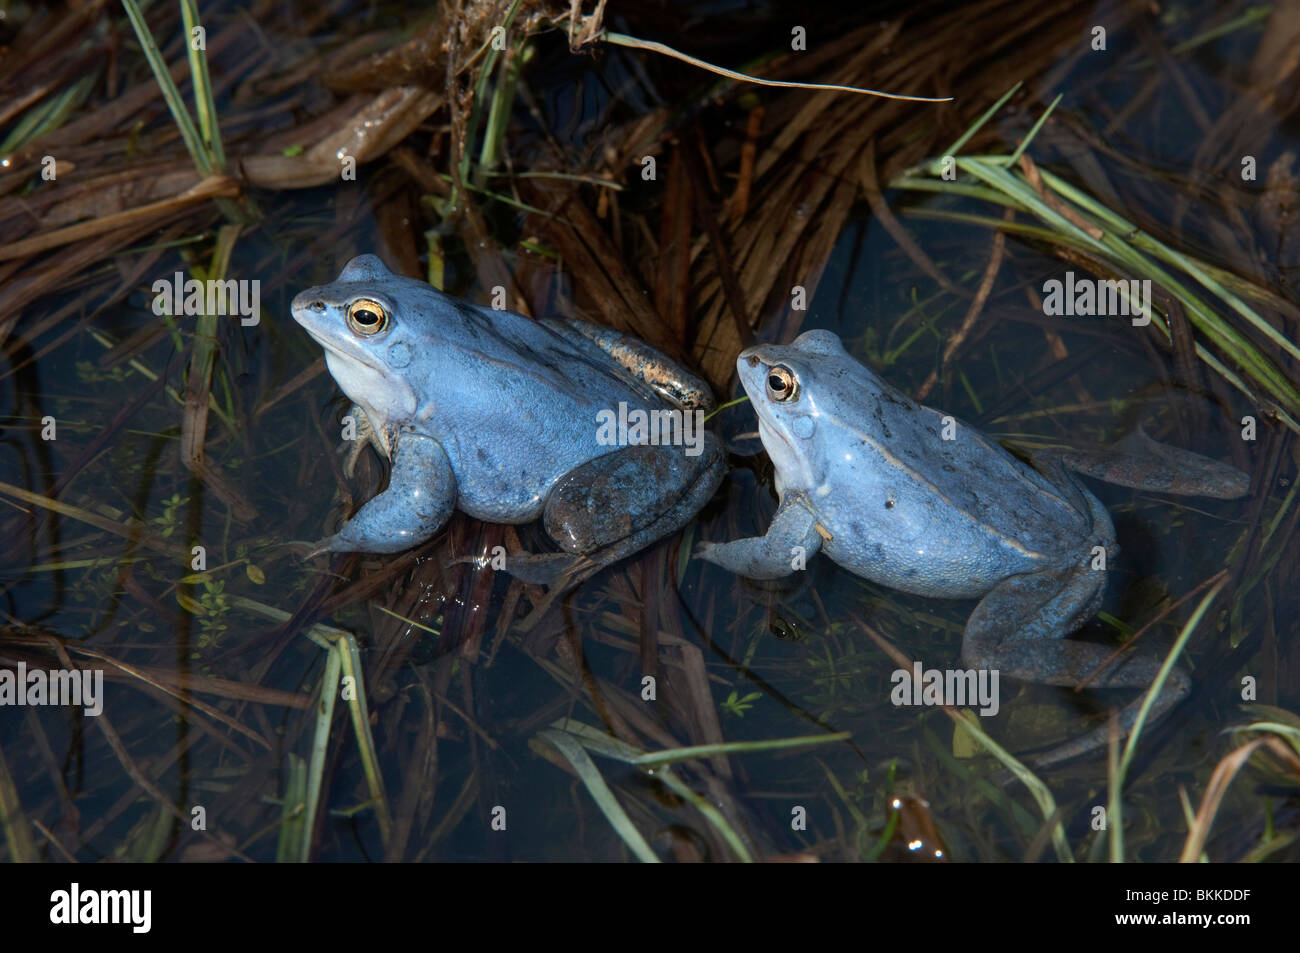 Moor Frog (Rana arvalis), two blue colored males in shallow water. Stock Photo